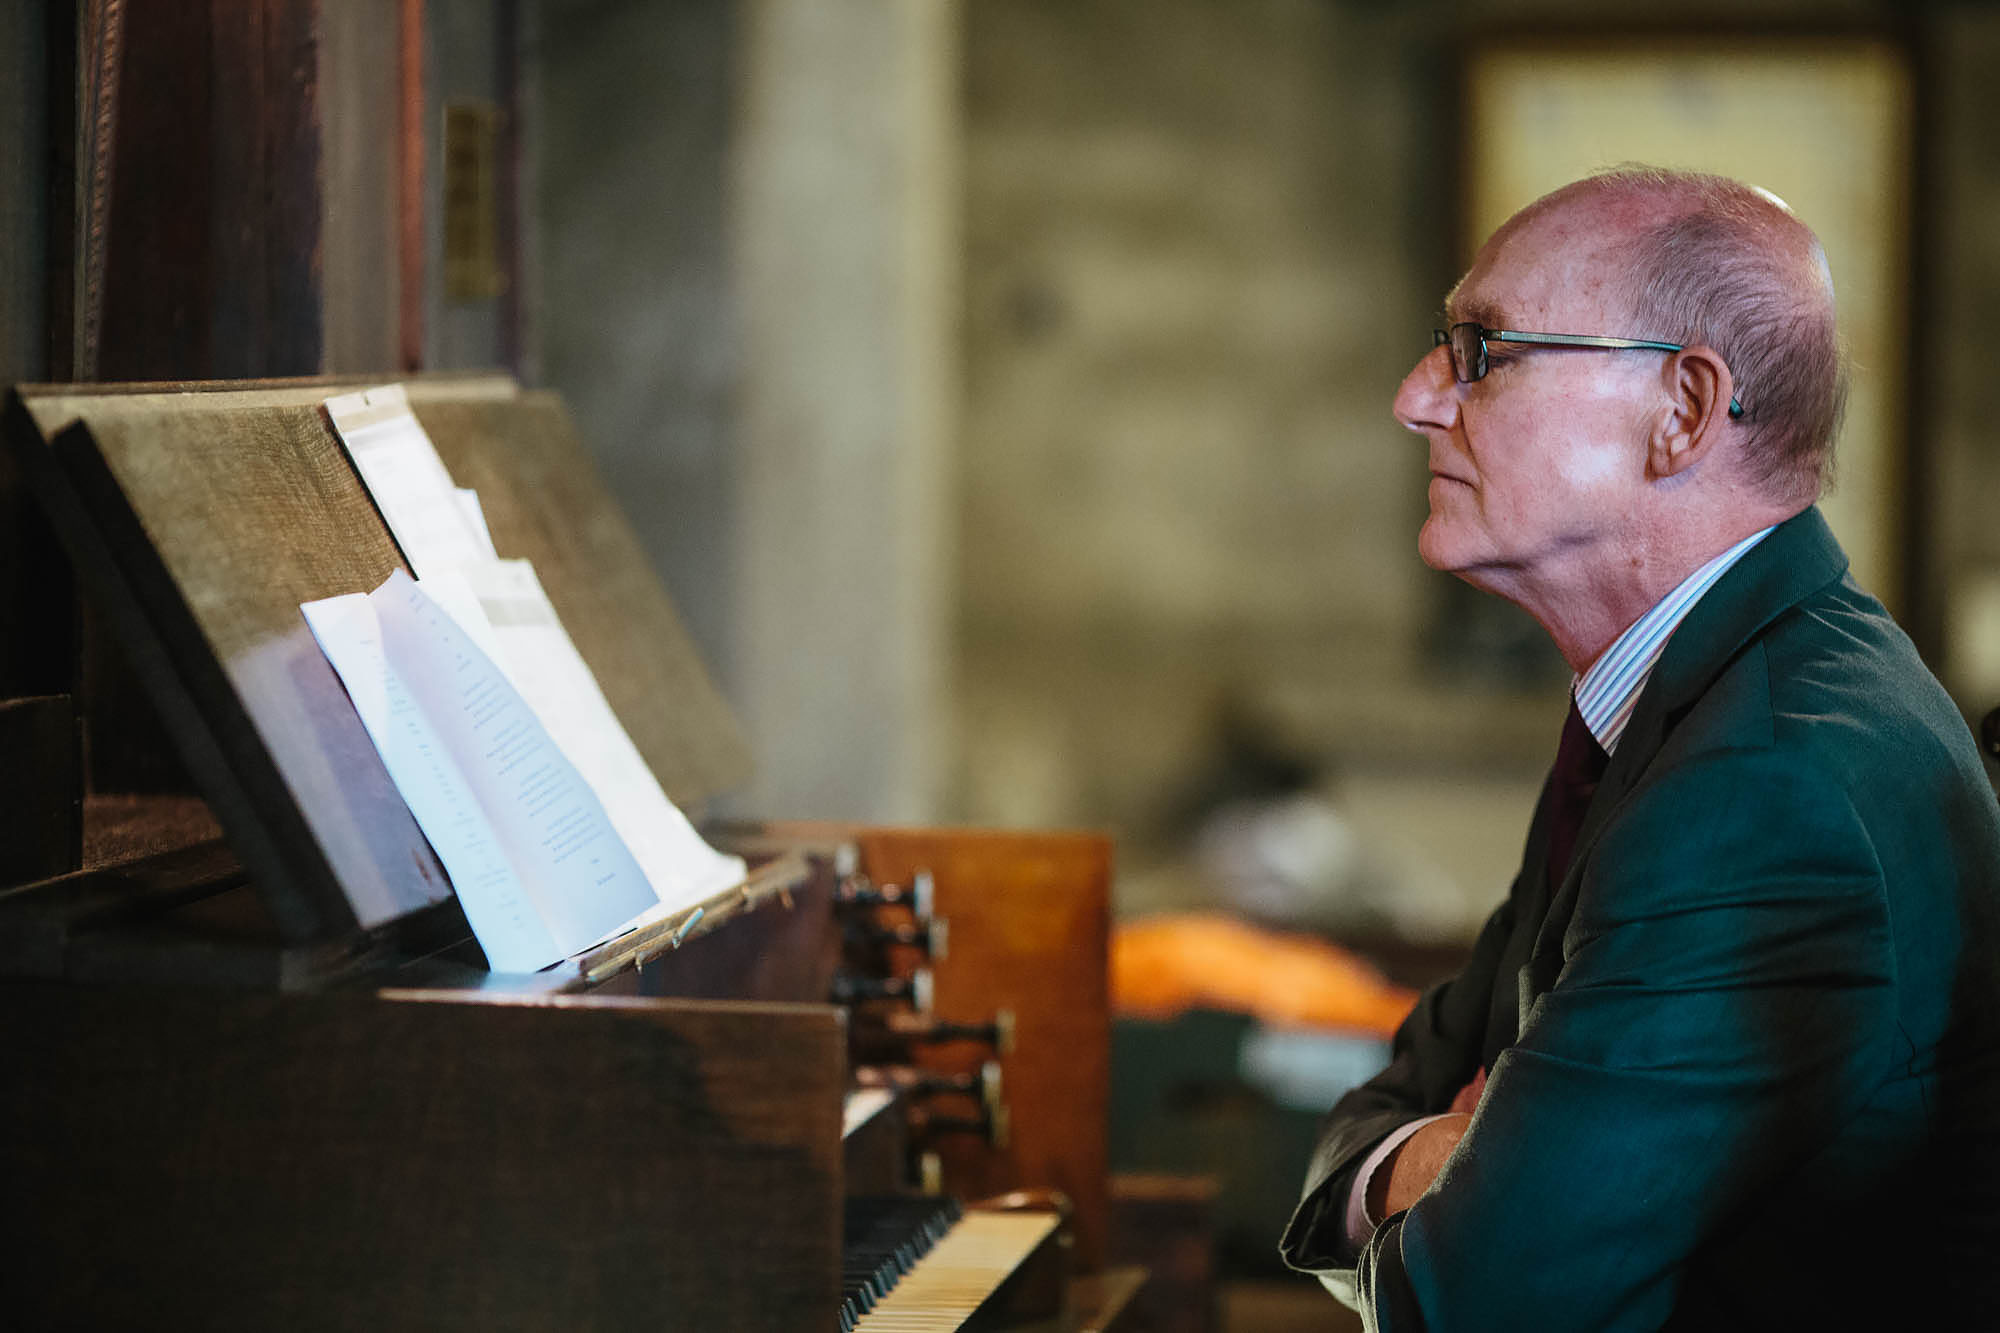 Church organist looks at his music during the wedding ceremony